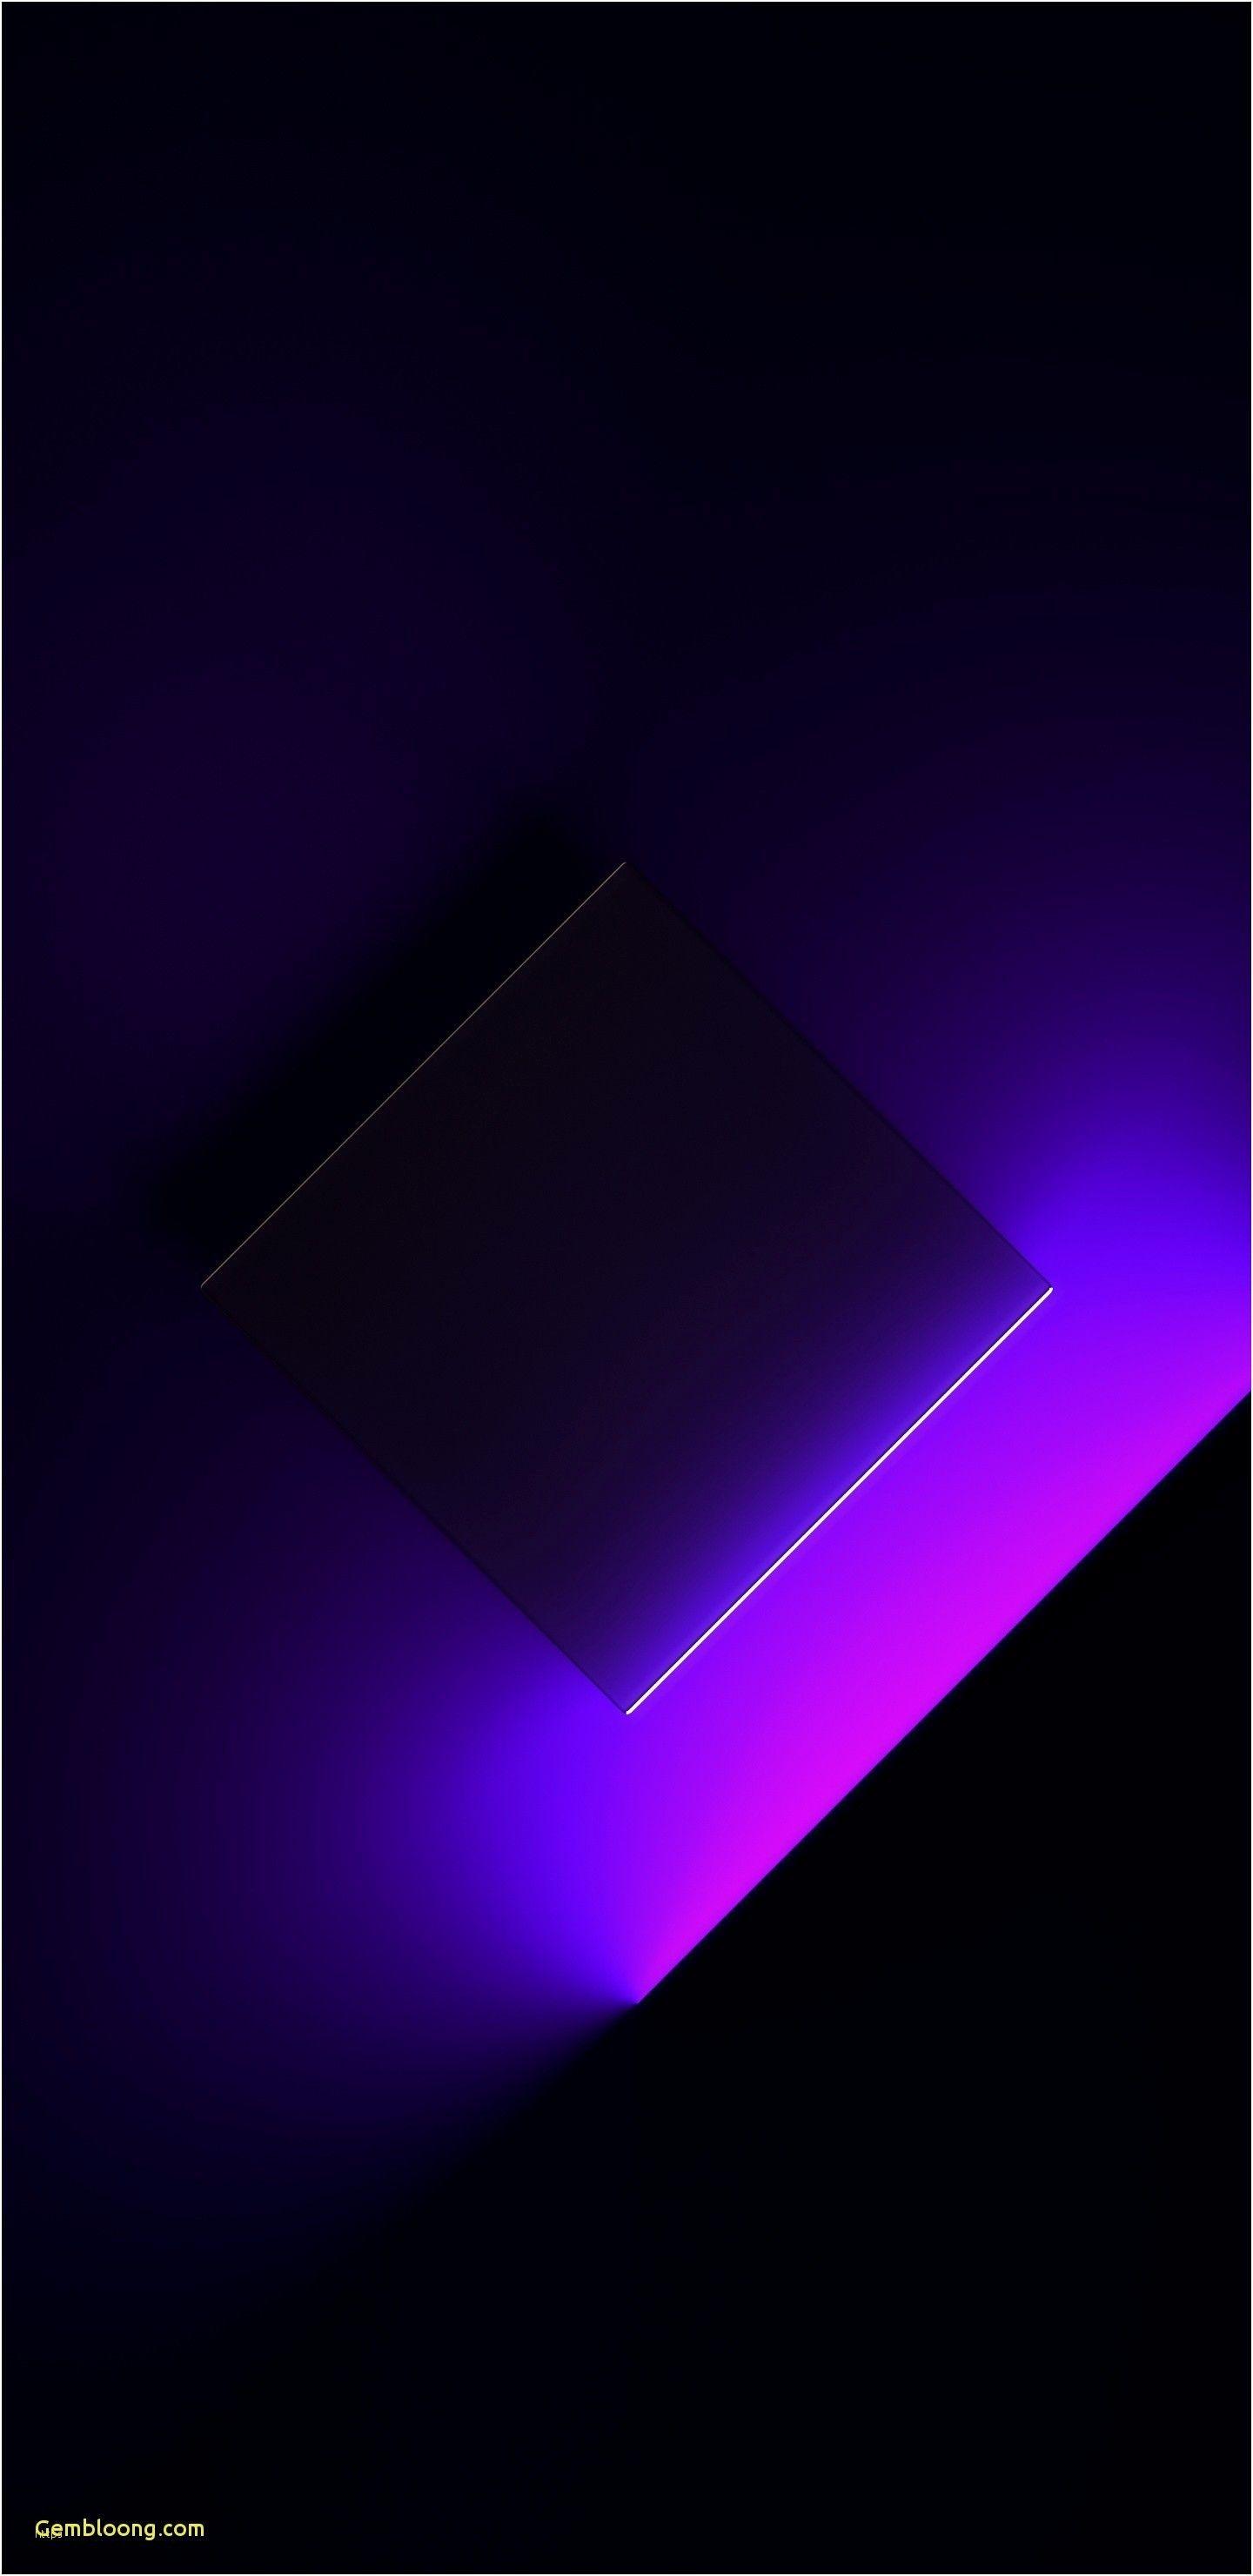 Black and Purple iPhone Wallpapers